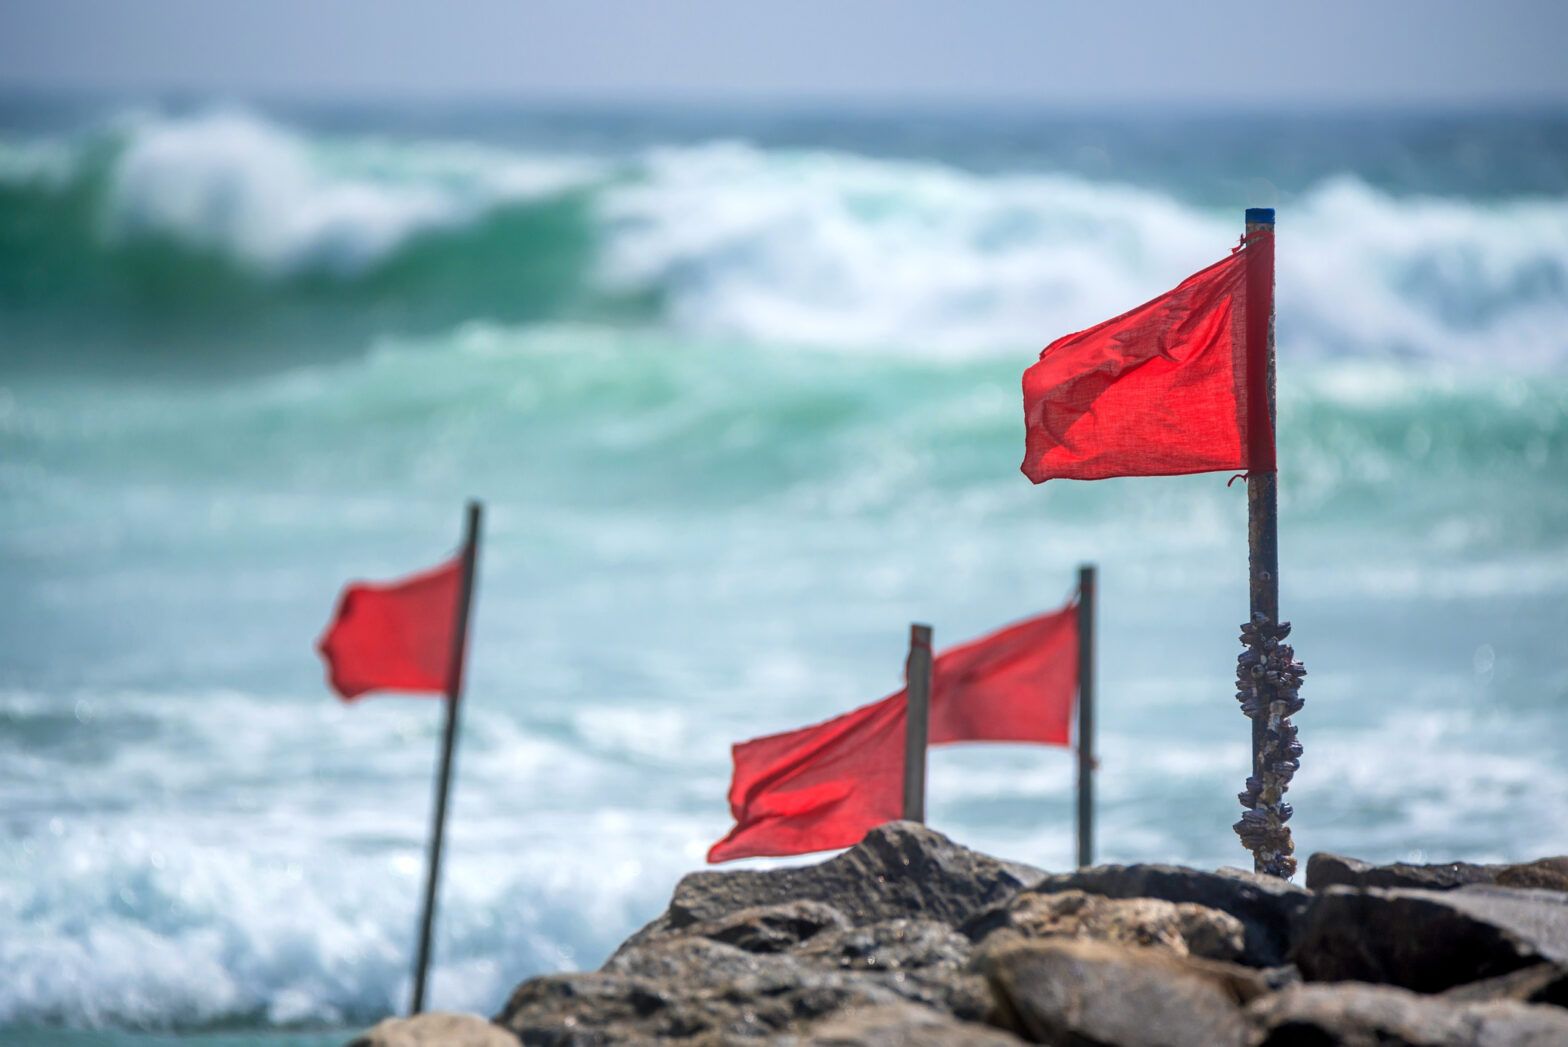 Red flags to look out for in corporate transition plans